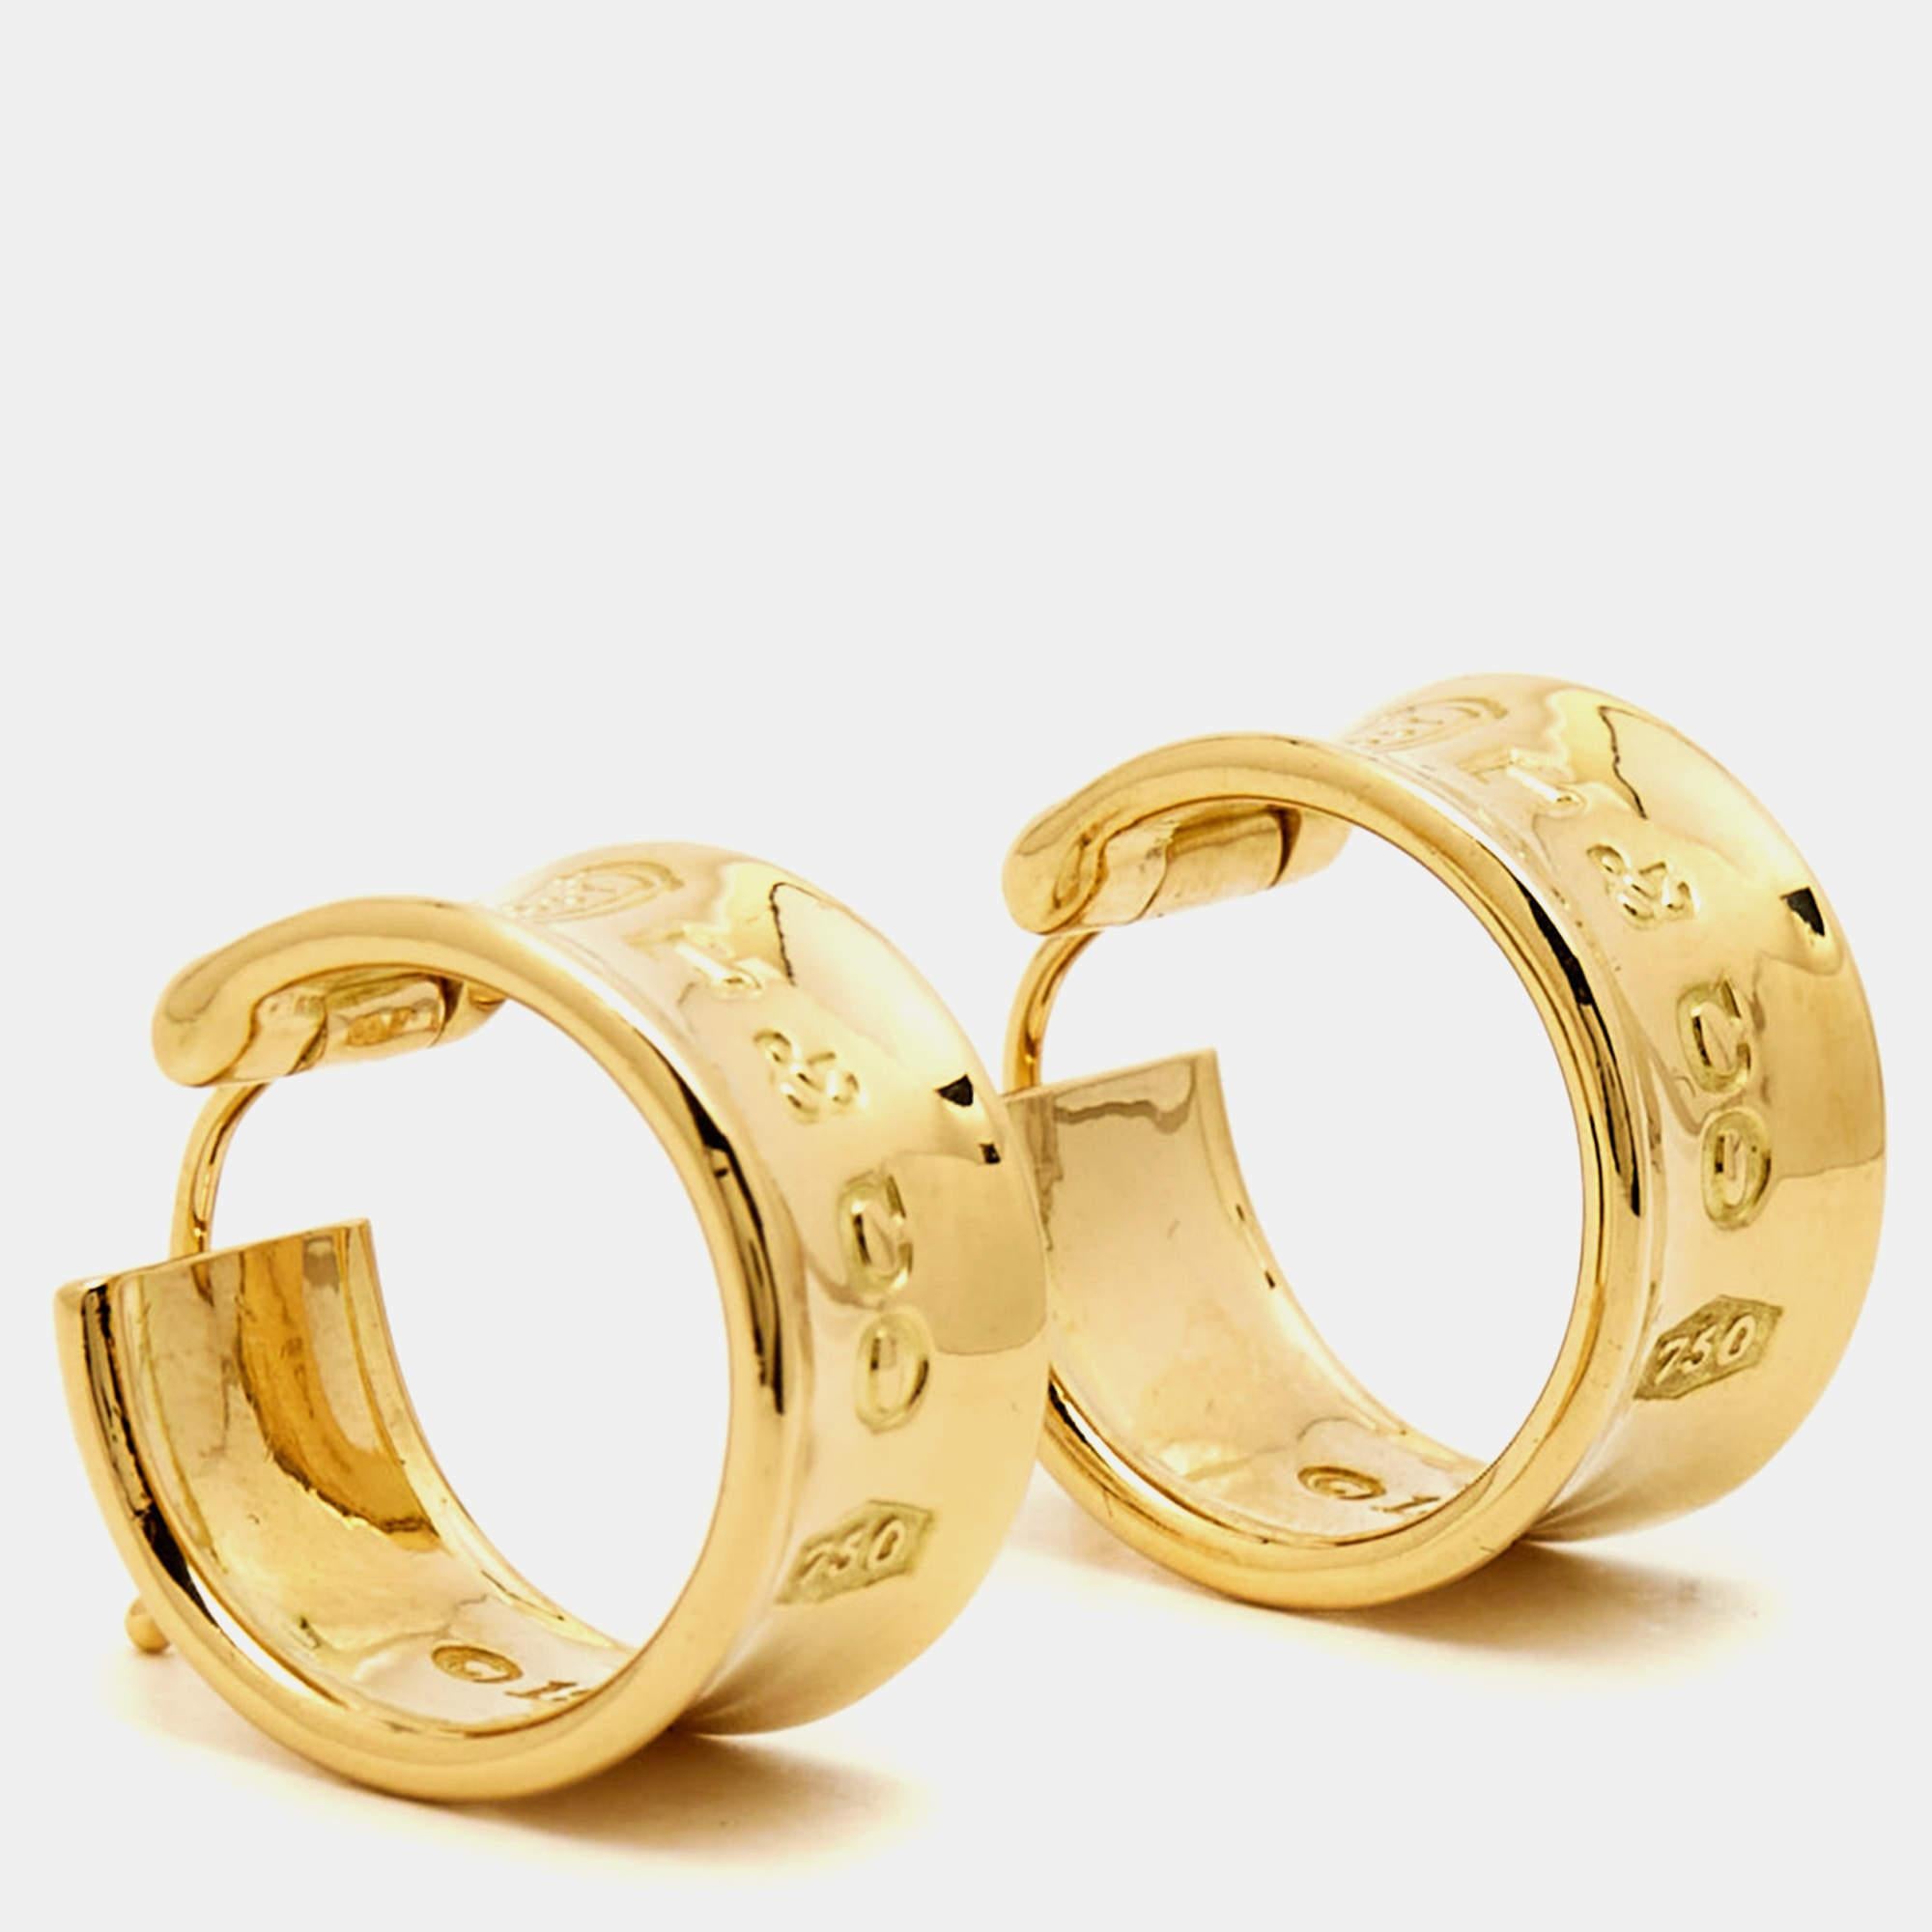 The Tiffany & Co. 1837 earrings are elegant and timeless accessories. Crafted from lustrous 18k yellow gold, these earrings have signature engraving, symbolizing the brand's legacy. Their classic design complements any outfit, making them a